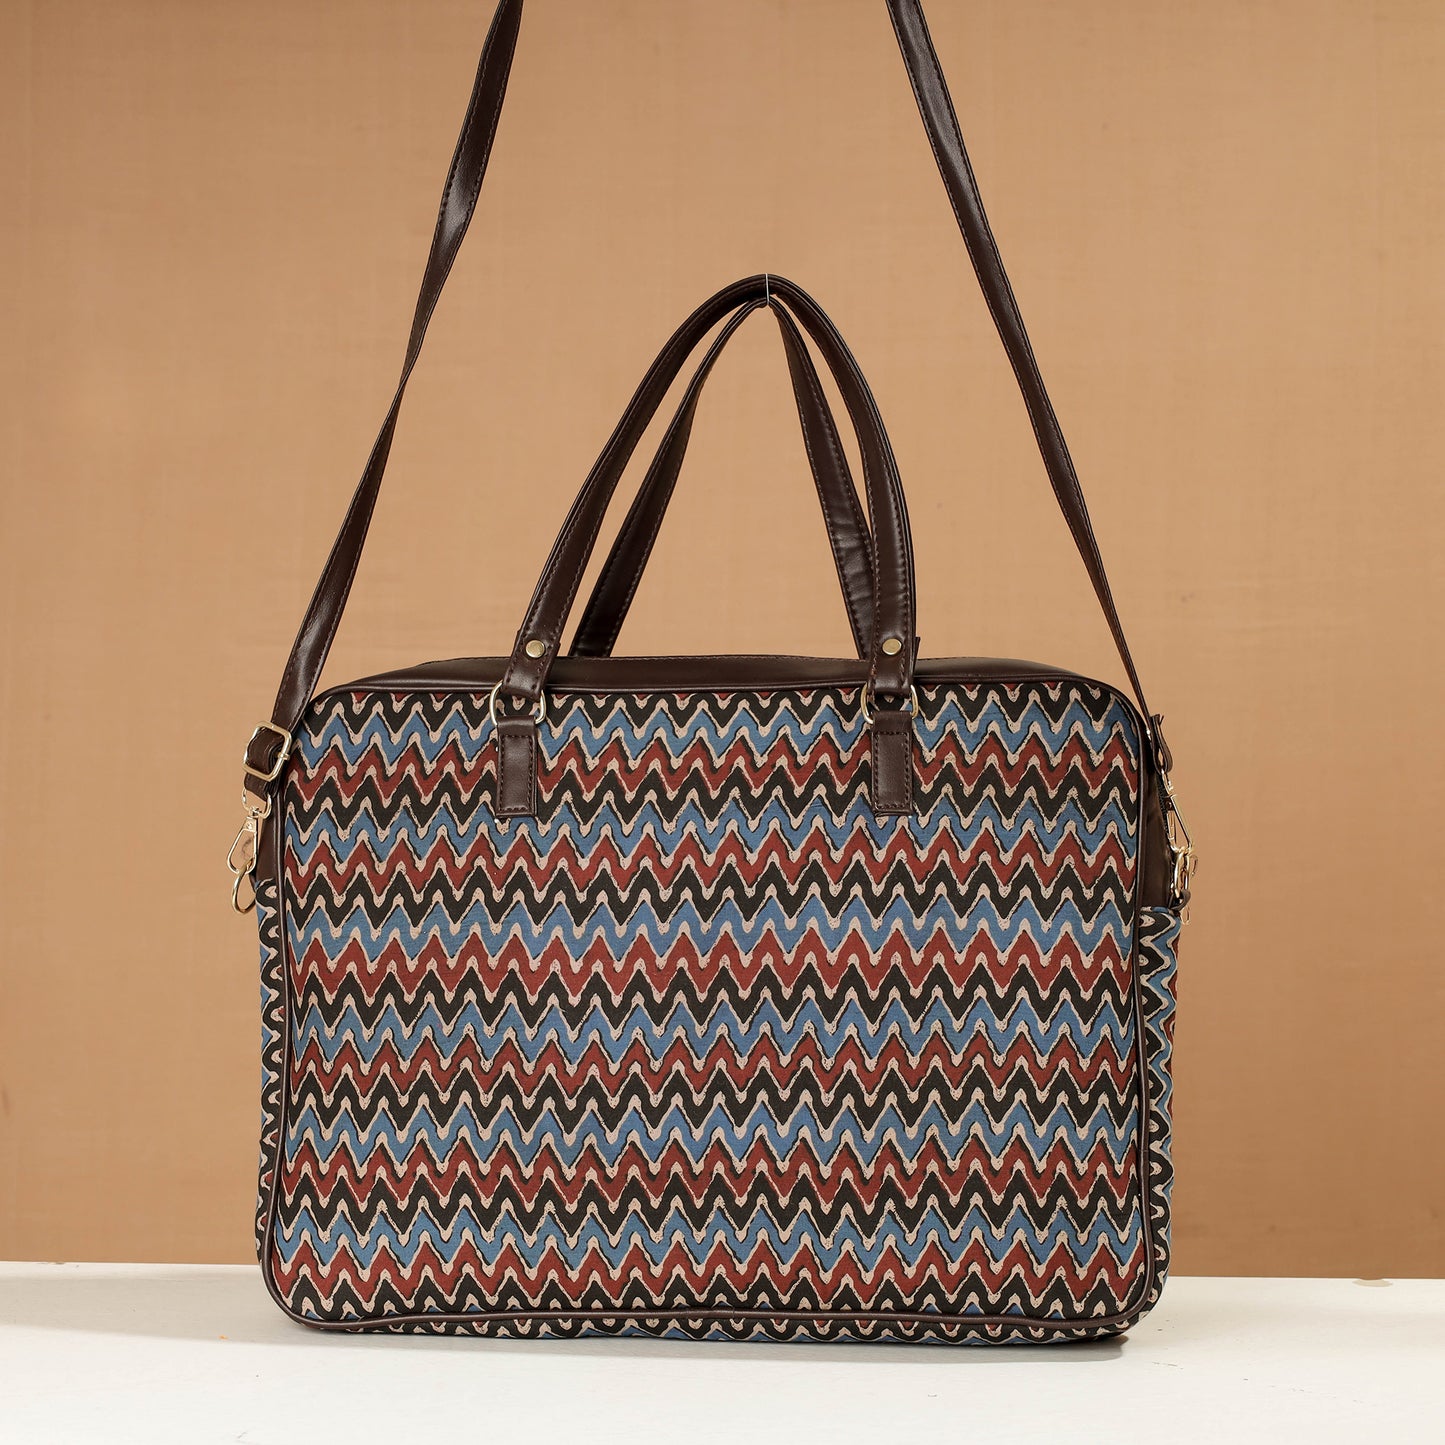 Handcrafted Printed Laptop Bag